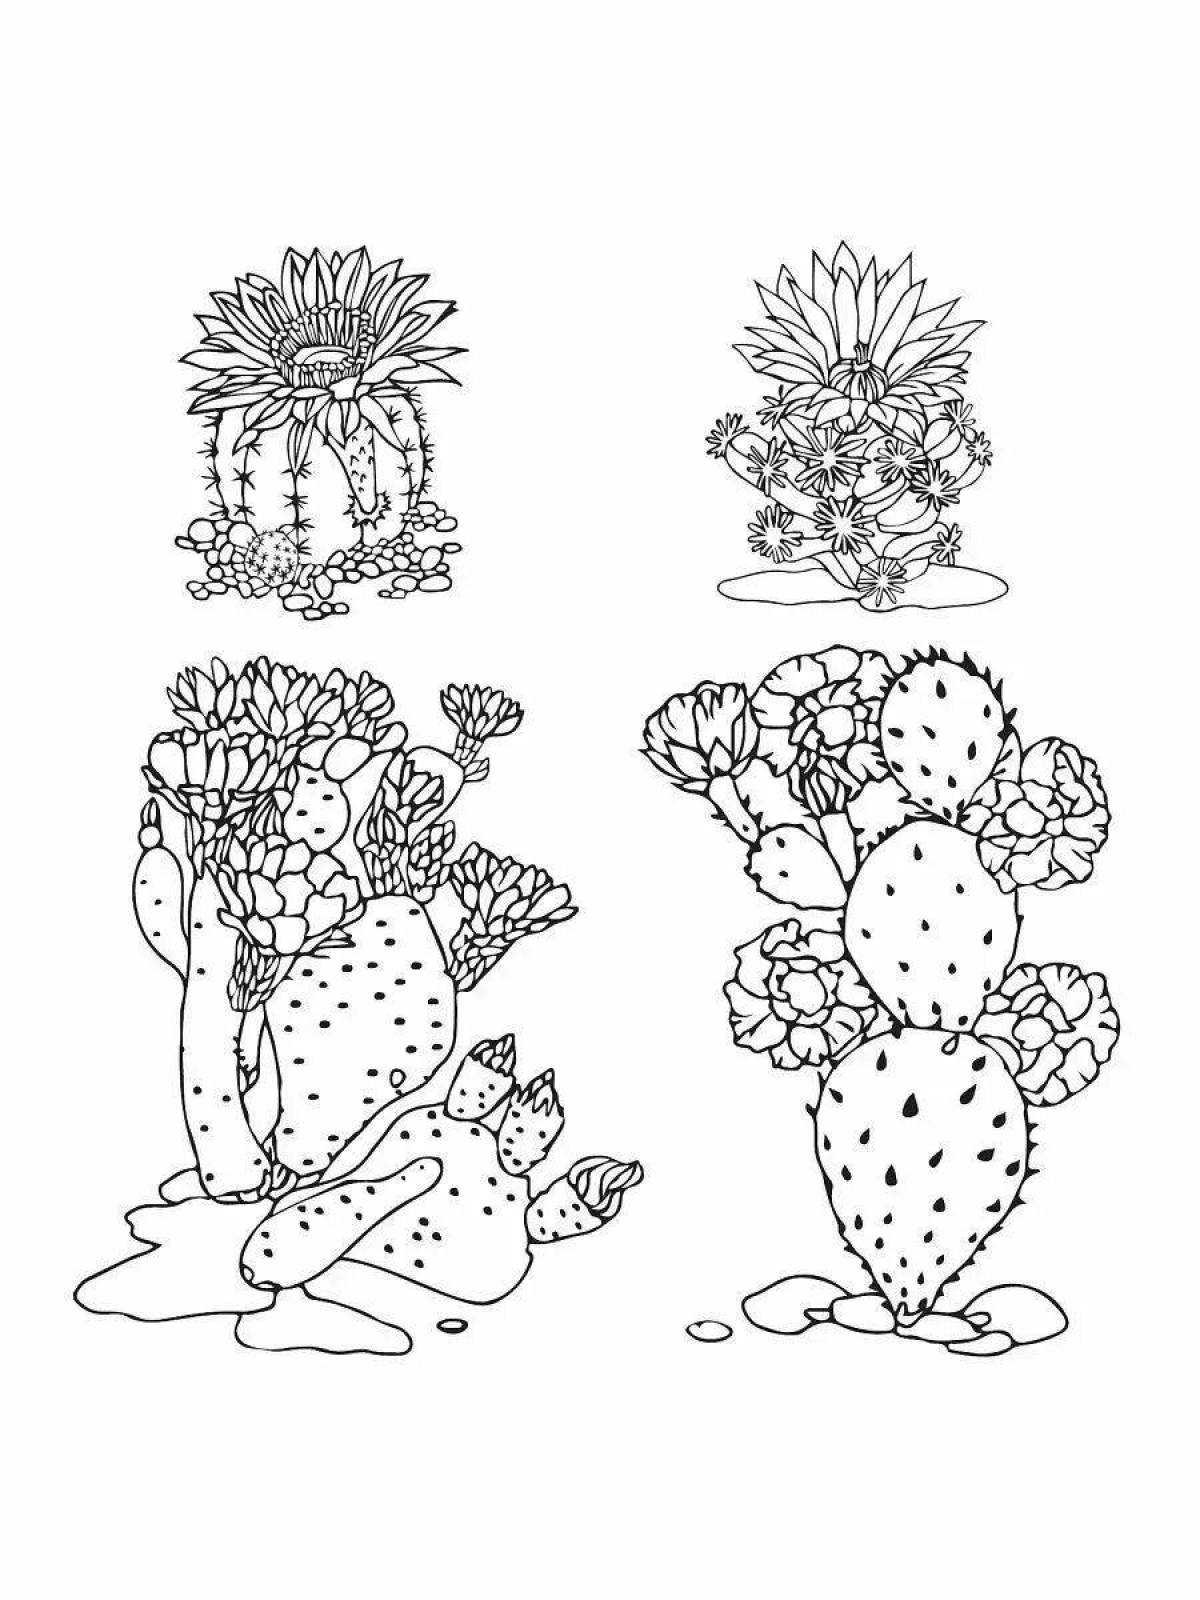 Glowing cactus coloring page